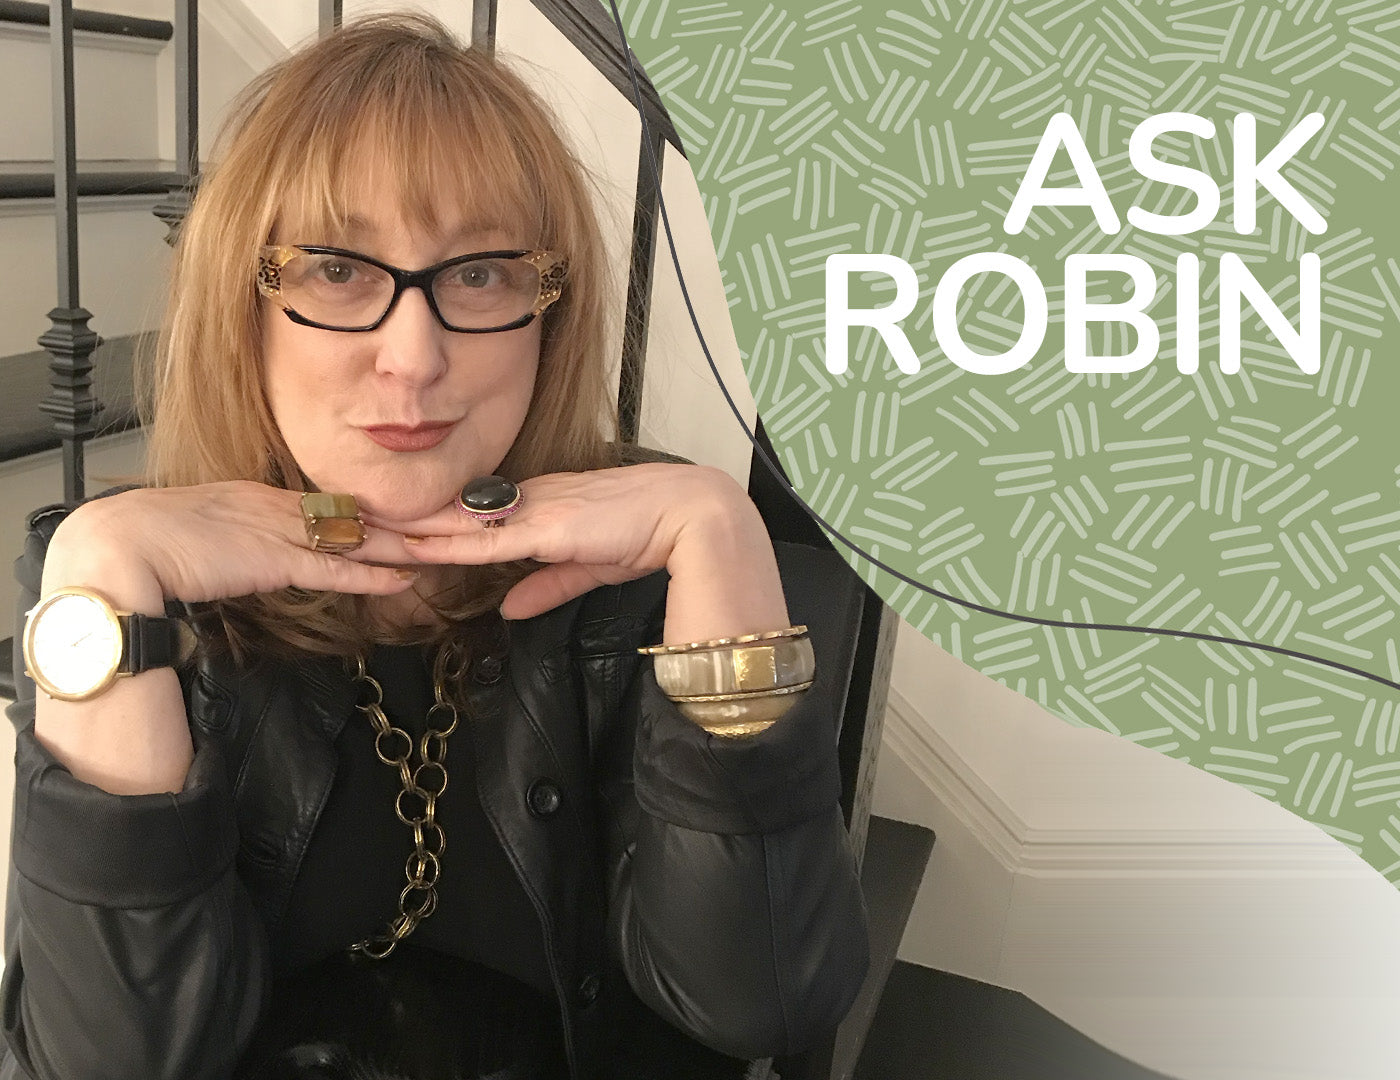 Image depicting Robin Baron with her head resting on her hands. Text reads: Ask Robin.